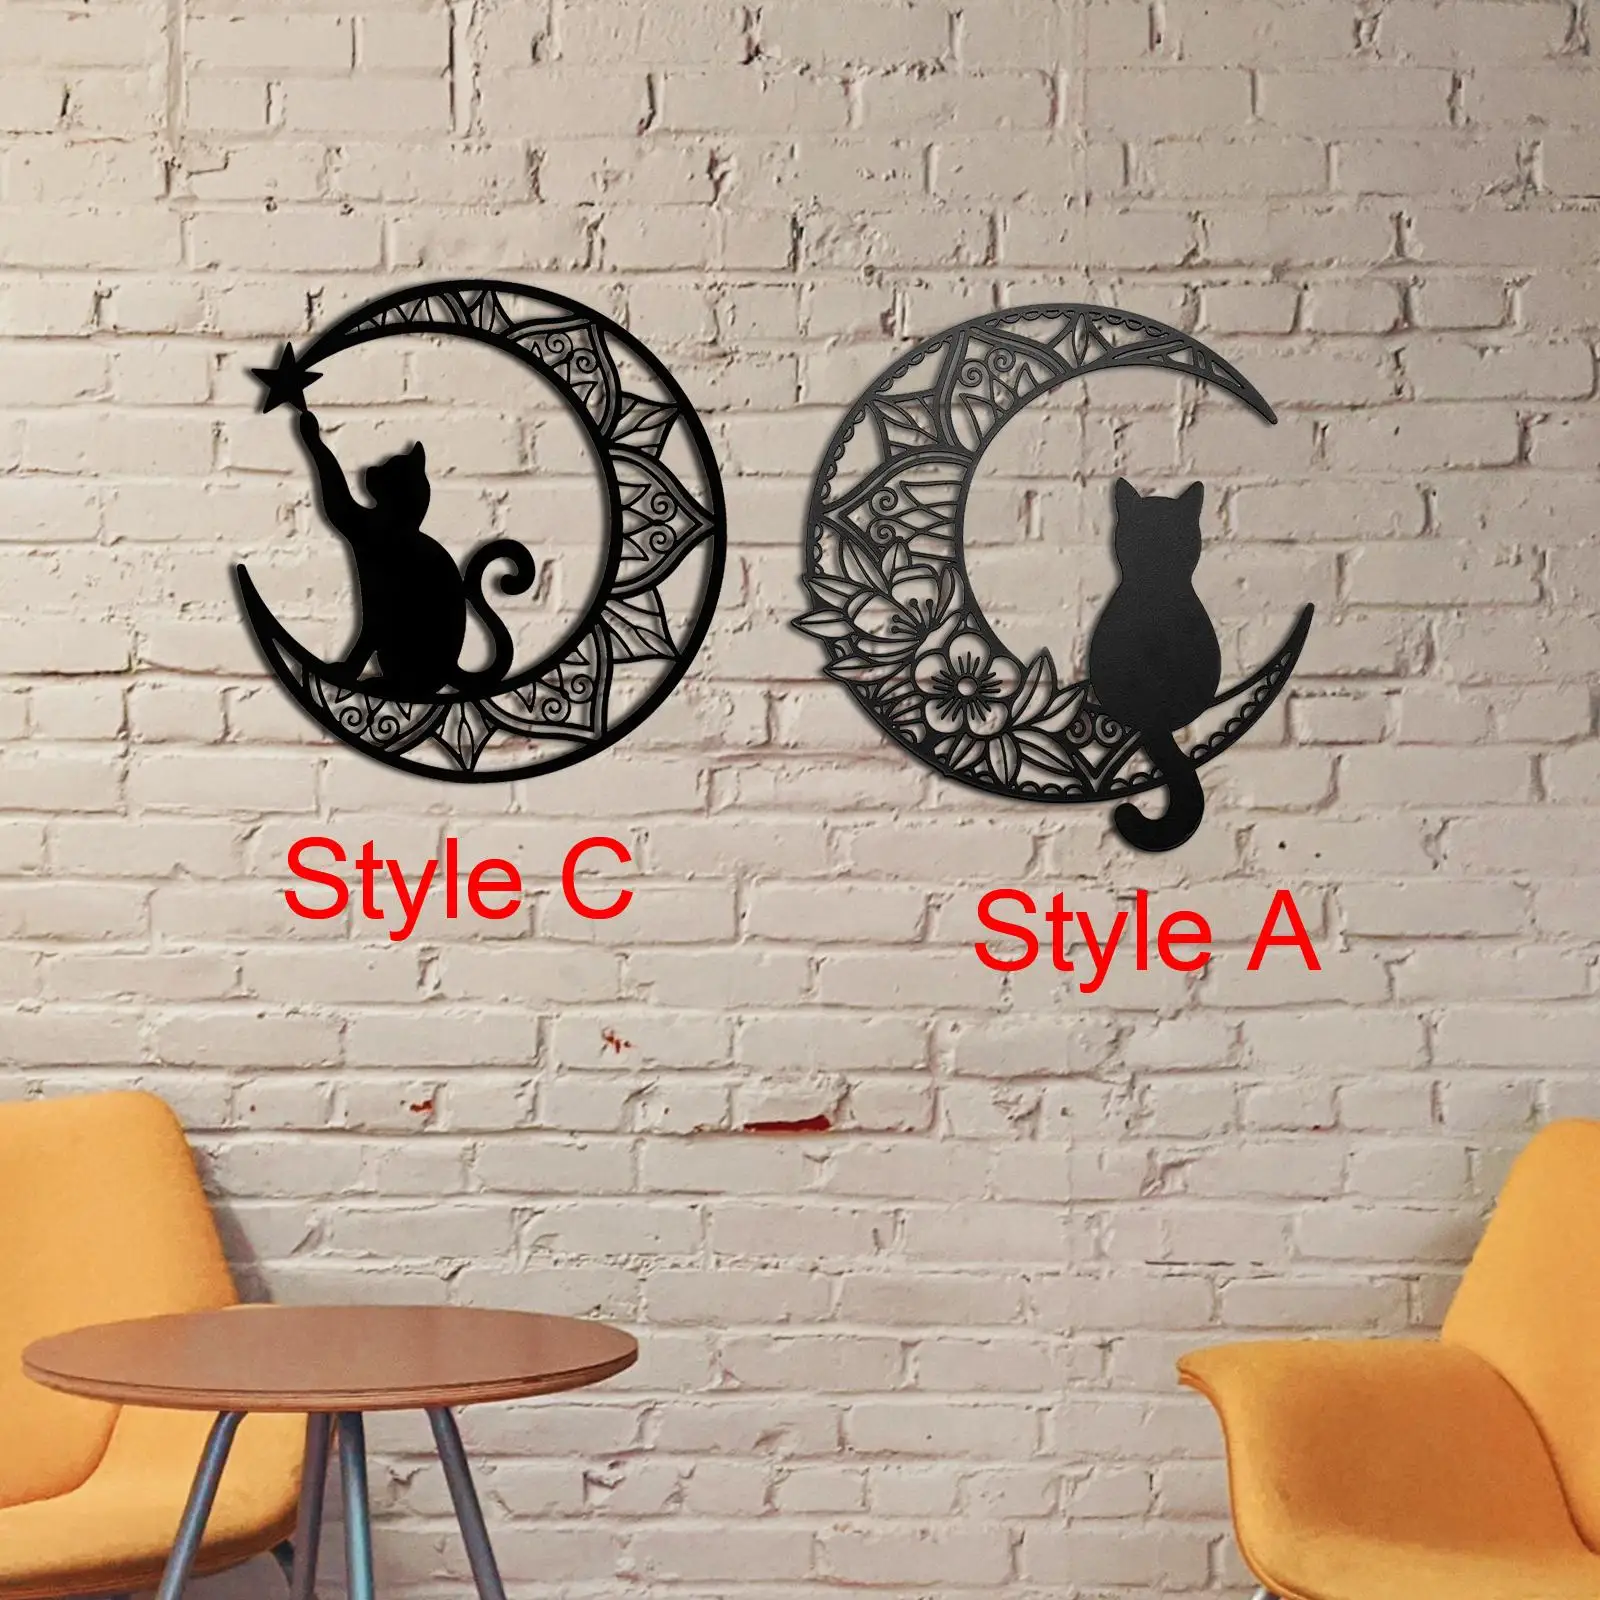 13inch Metal Wall Decor, Cat Silhouette Wall Hanging Wall Sculpture Sign for Balcony Bedroom Patio Bathroom Living Room